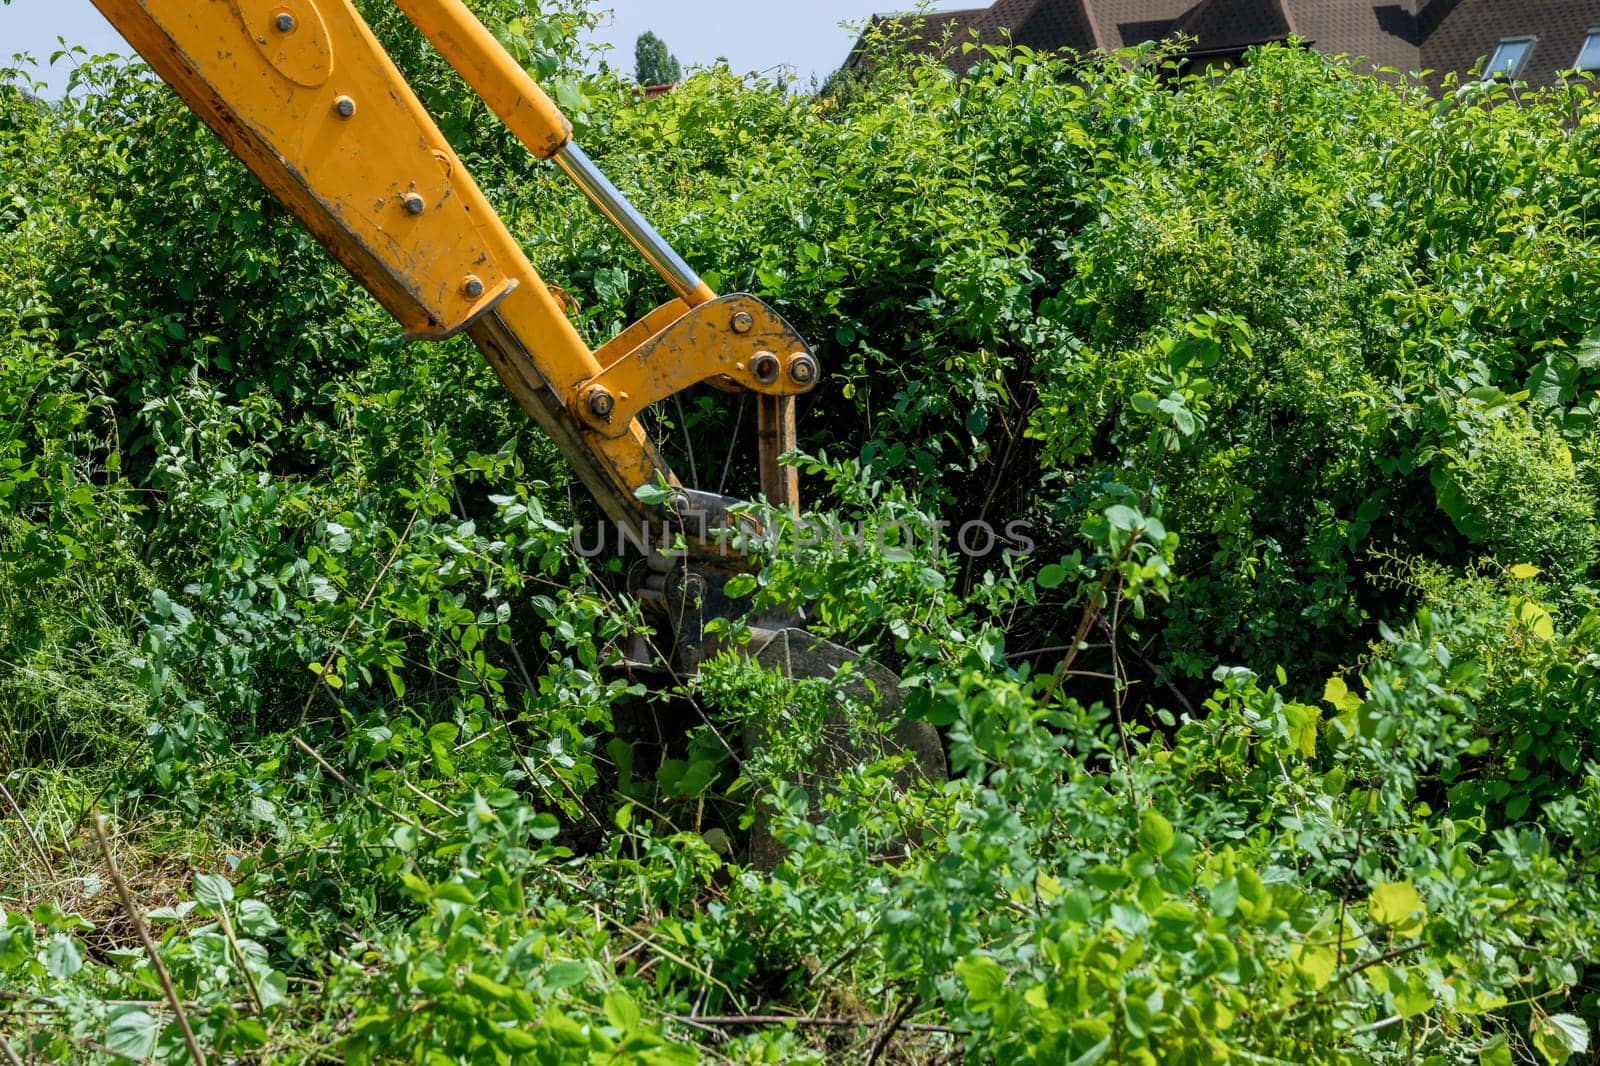 From bushes to tall trees, excavator is equipped to handle wide range of vegetation removal tasks.